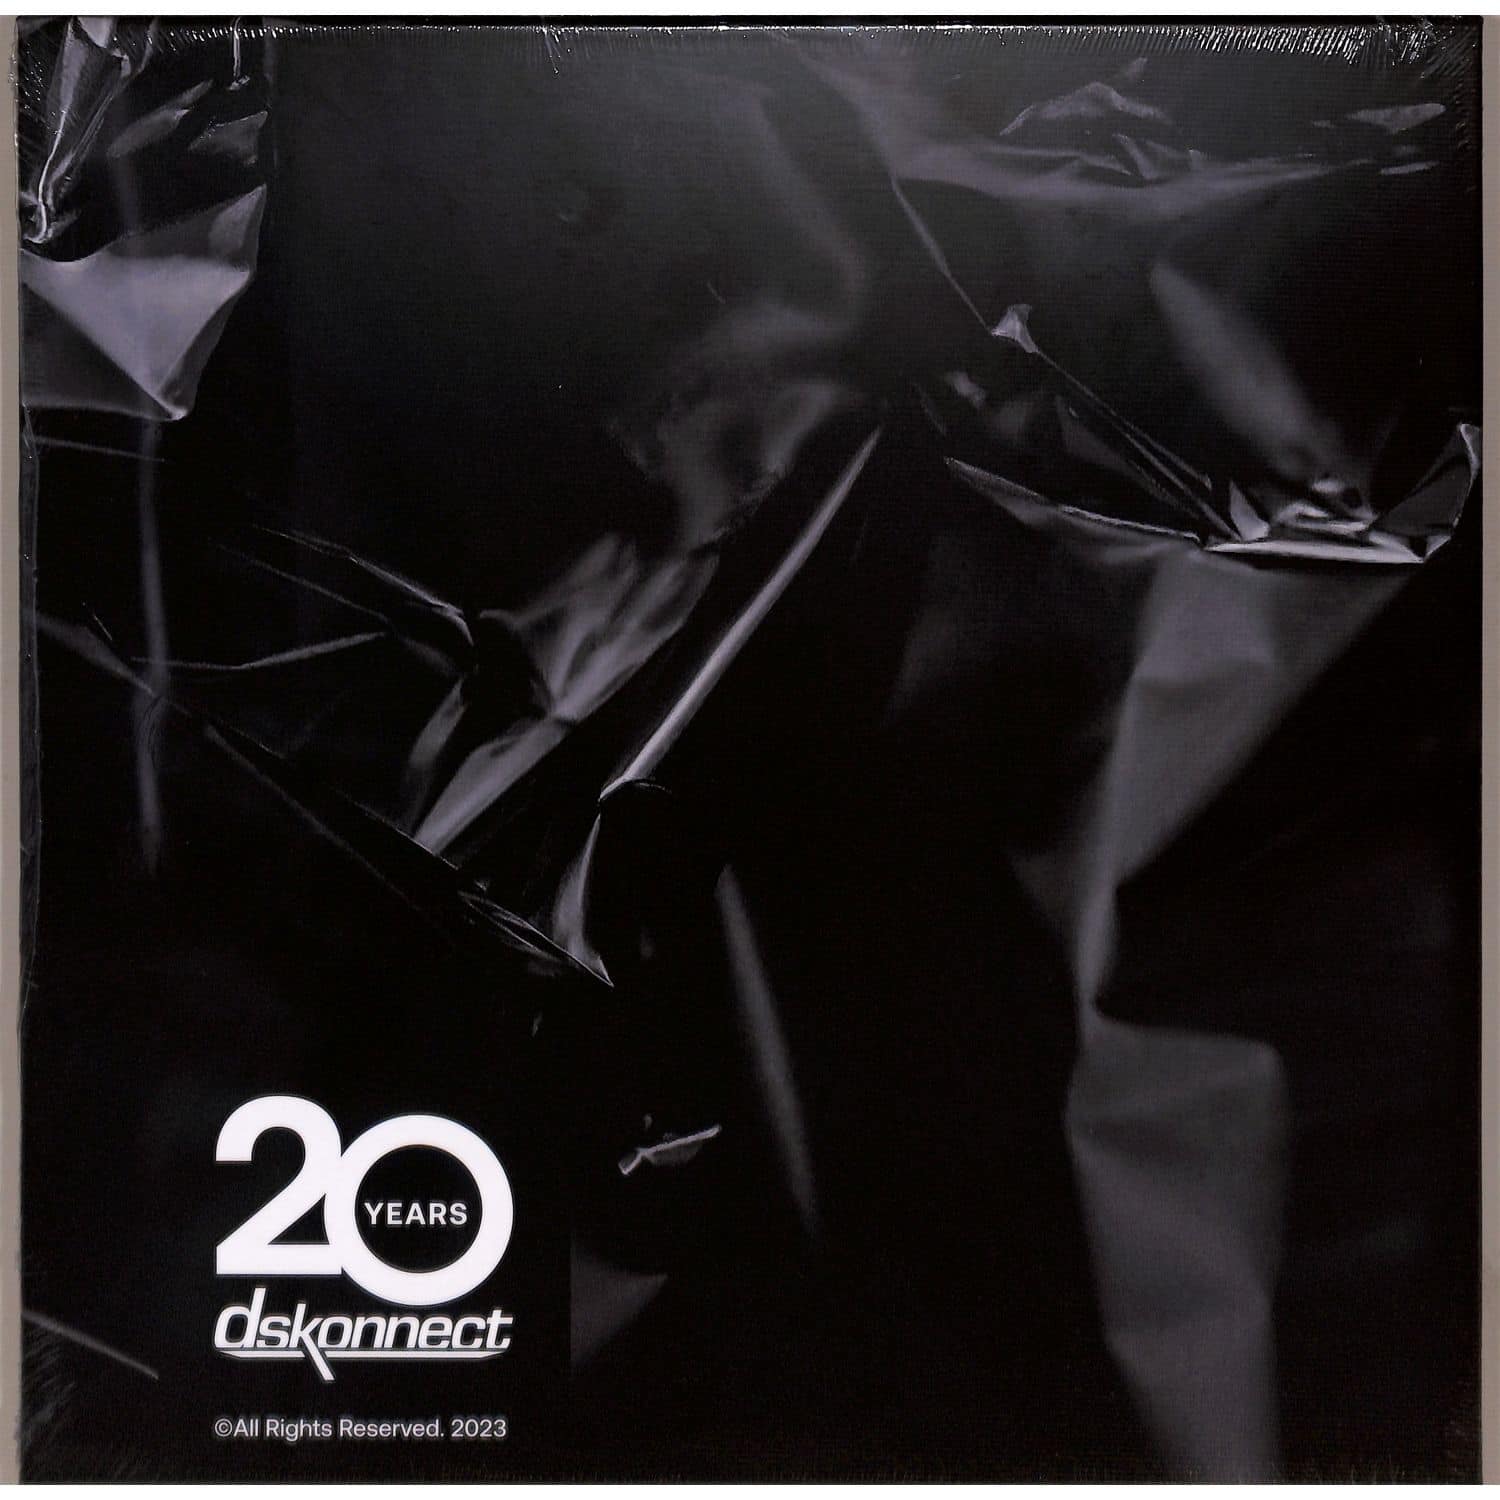 Various Artists - DSKONNECT 20 YEARS 